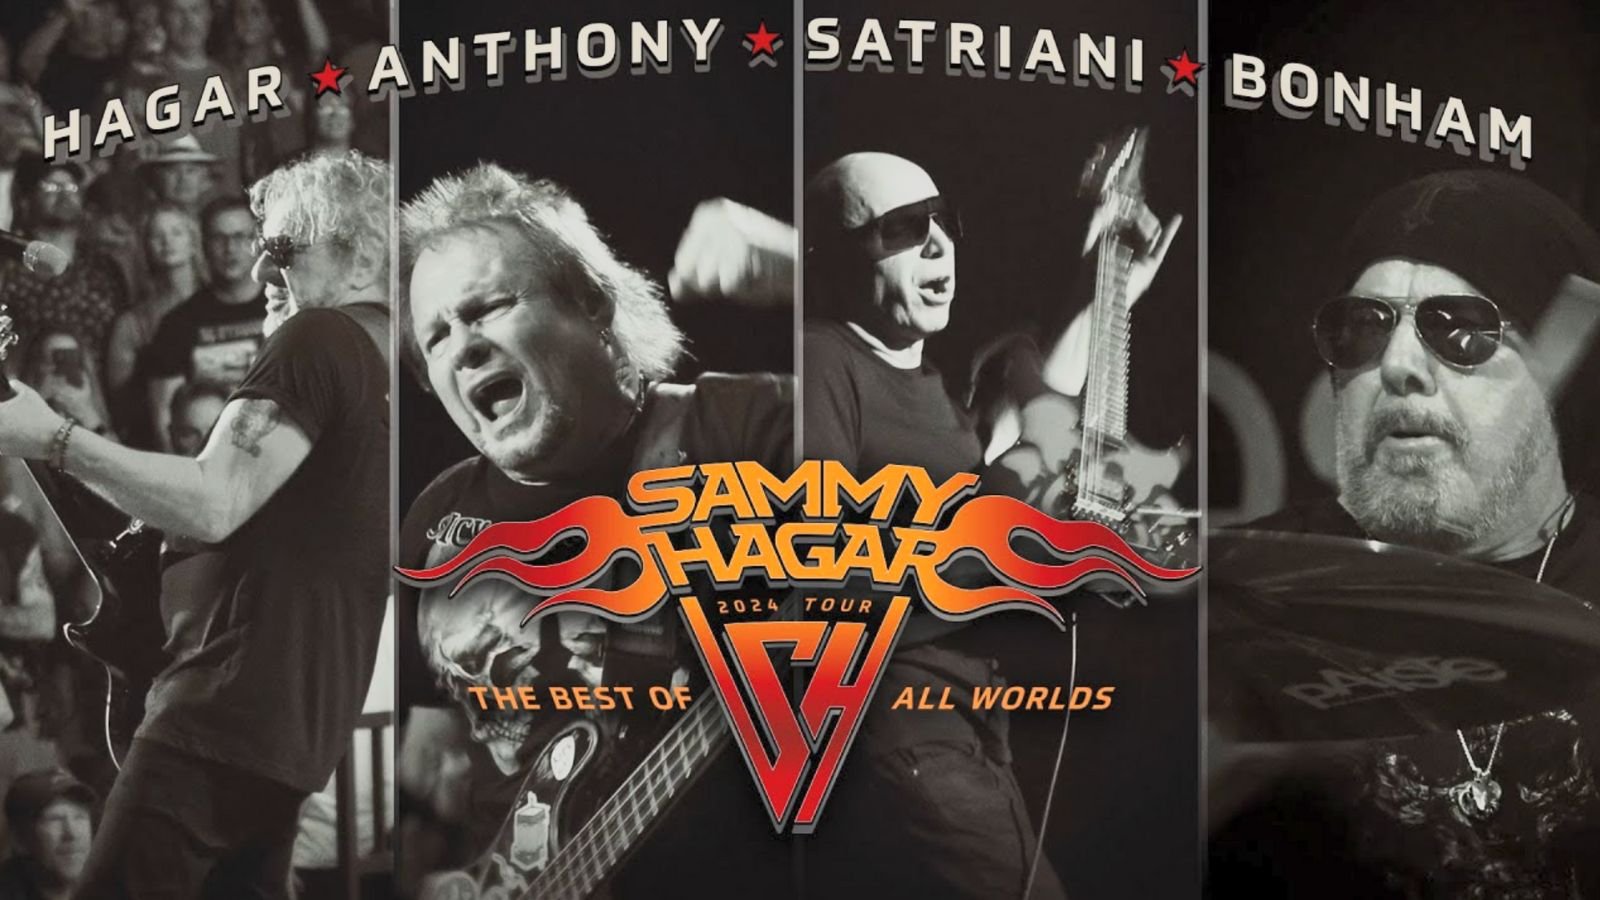 <p><span>Seeing Sammy Hagar perform with some of the most gifted rock guitar players on the planet is nothing shocking. Well, what is shocking is that, besides the all-star band joining him on the road for Van Halen and Red Rocker classics, he also </span><a href="https://www.sfchronicle.com/entertainment/article/sammy-hagar-david-lee-roth-van-halen-18509242.php"><span>invited</span></a><span> David Lee Roth on stage. Will he sing with Sammy for old times' sake? We'll find out!</span></p> <ul>   <li><span>Starts on July 13th in West Palm Beach, Florida</span></li>   <li><span>Ends on August 31st in St. Louis, Missouri</span></li>  </ul> <p><span>Full tour dates and tickets </span><a href="http://www.redrocker.com/"><span>here</span></a><span>.</span></p>